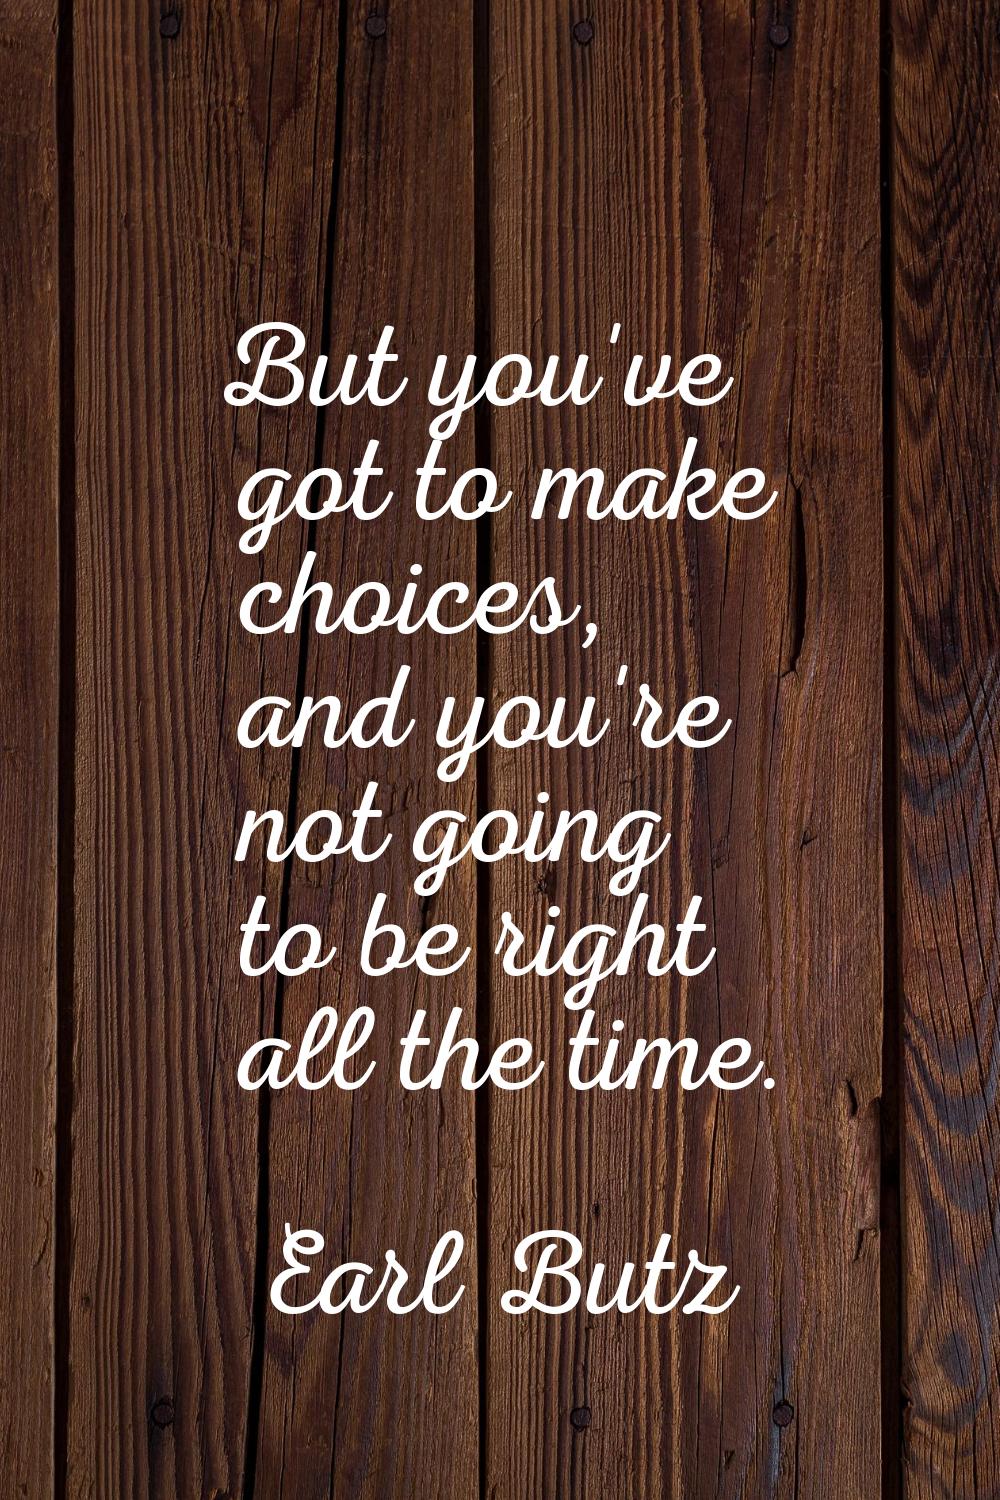 But you've got to make choices, and you're not going to be right all the time.